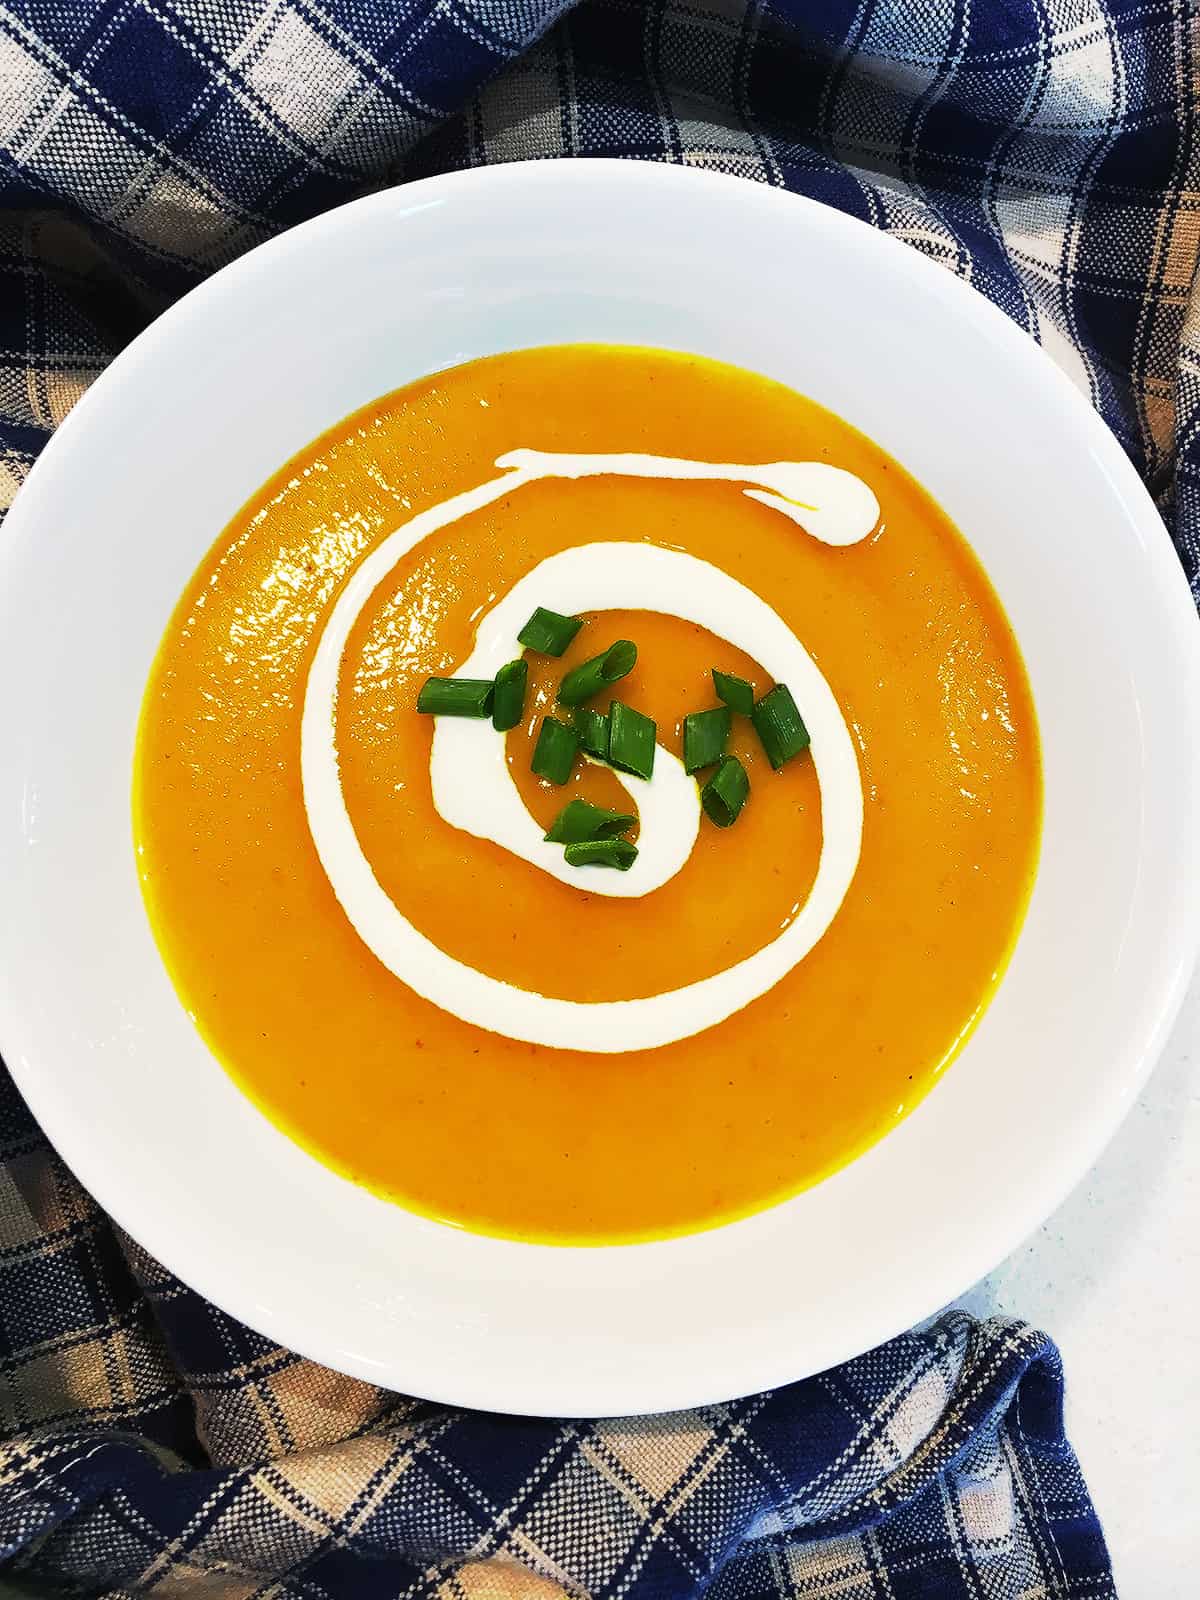 Creamy Carrot Soup with Cumin and Lime garnished with sour cream and chives and adorned with a navy blue and tan plaid napkin